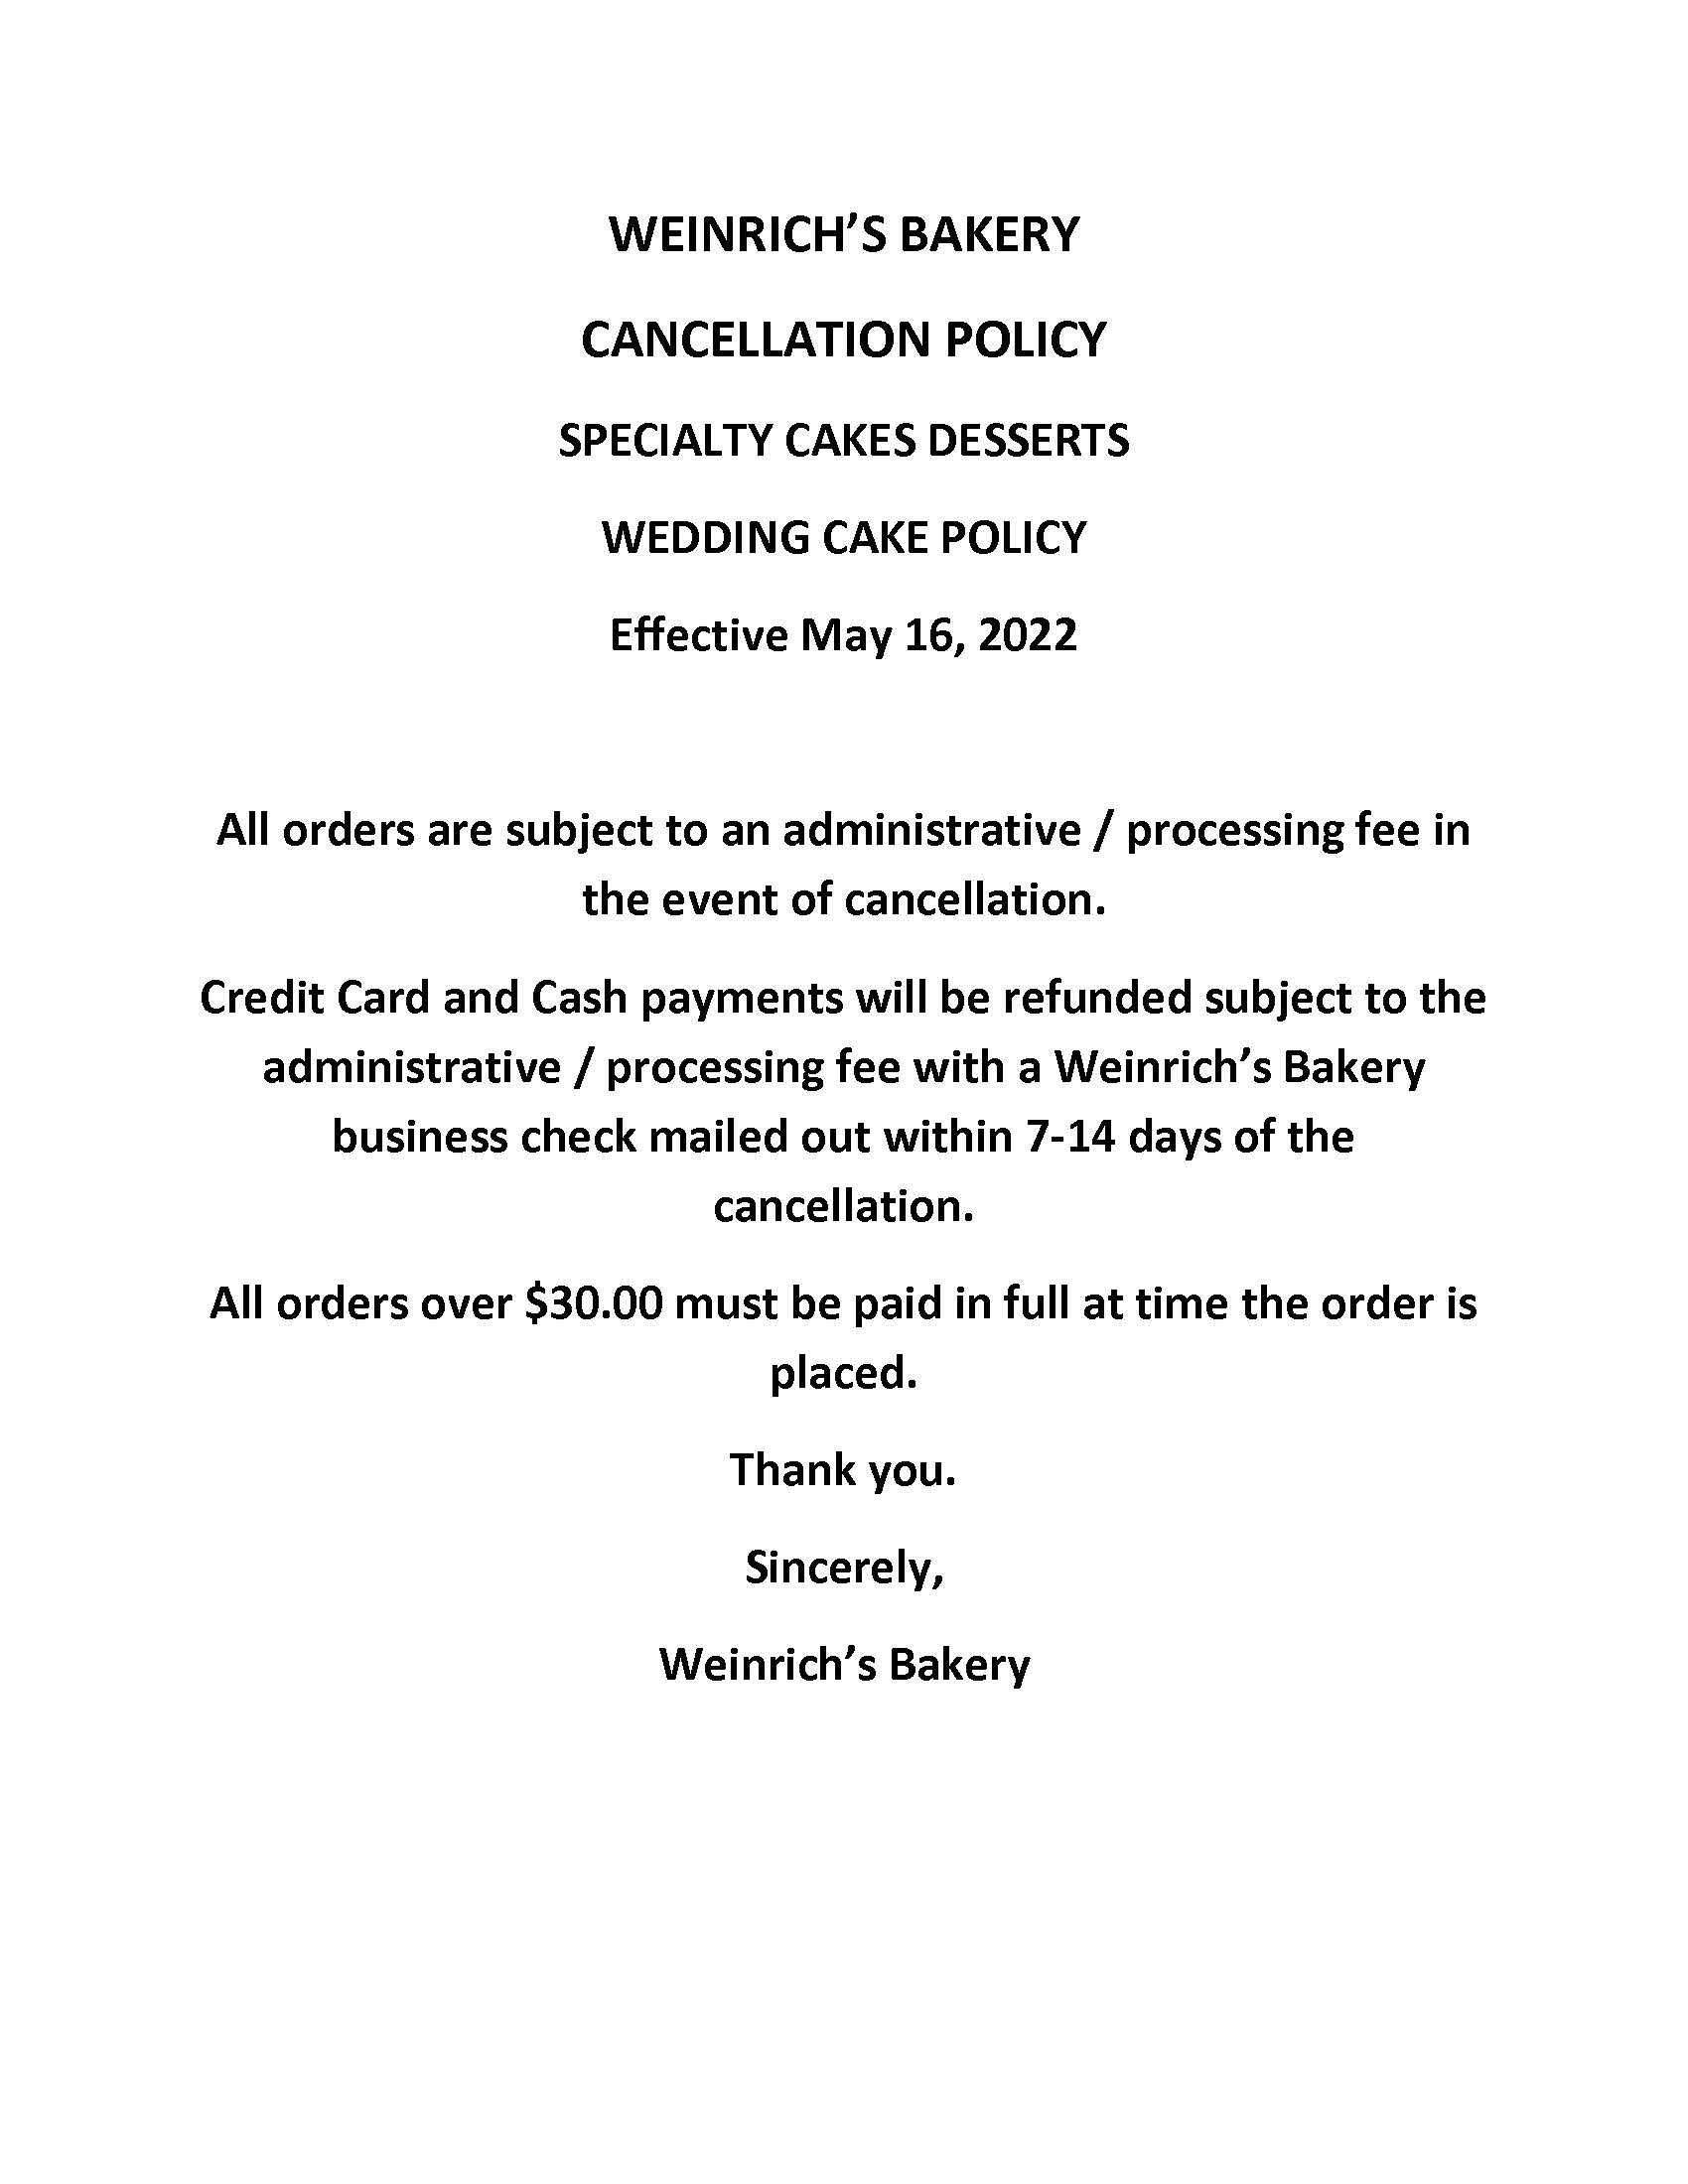 CANCELLATION POLICY MAY 2022